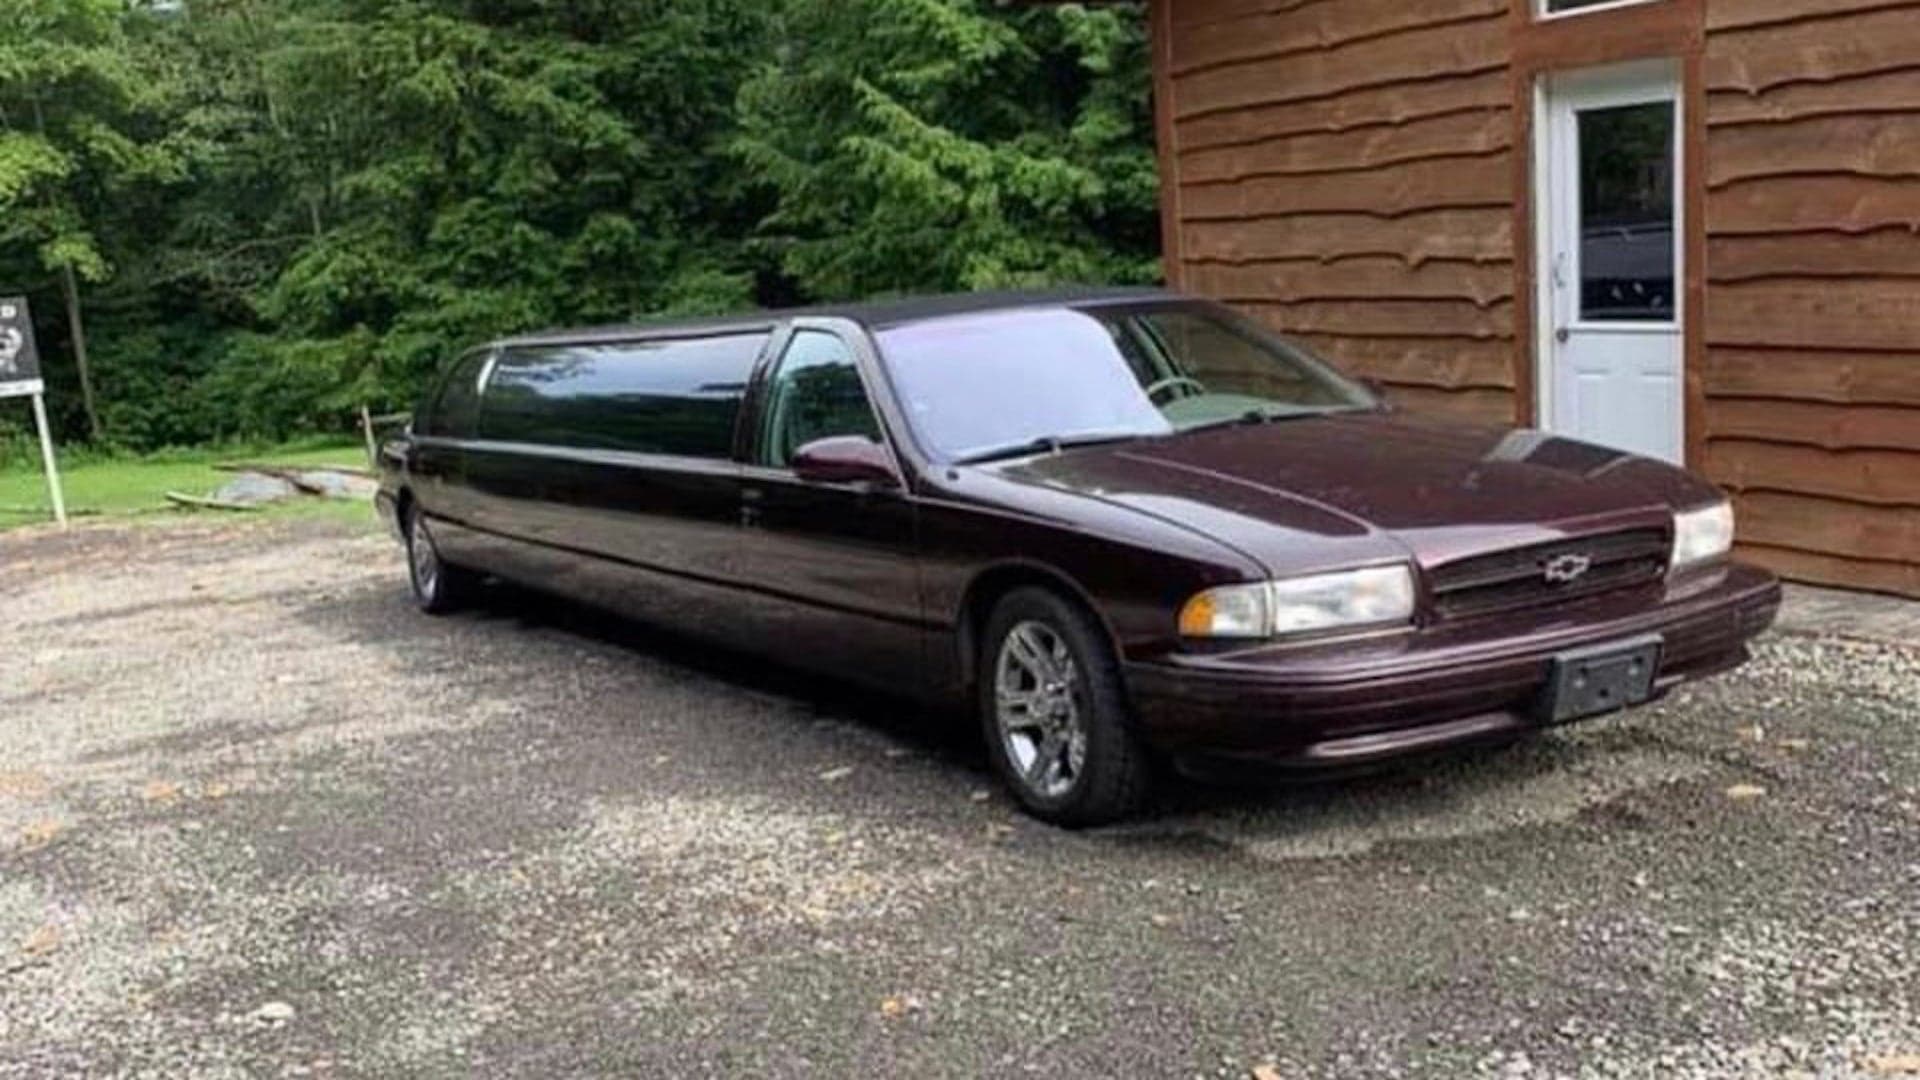 Turn Every Night Into Prom Night With This $5,000 Chevrolet Impala SS Limousine